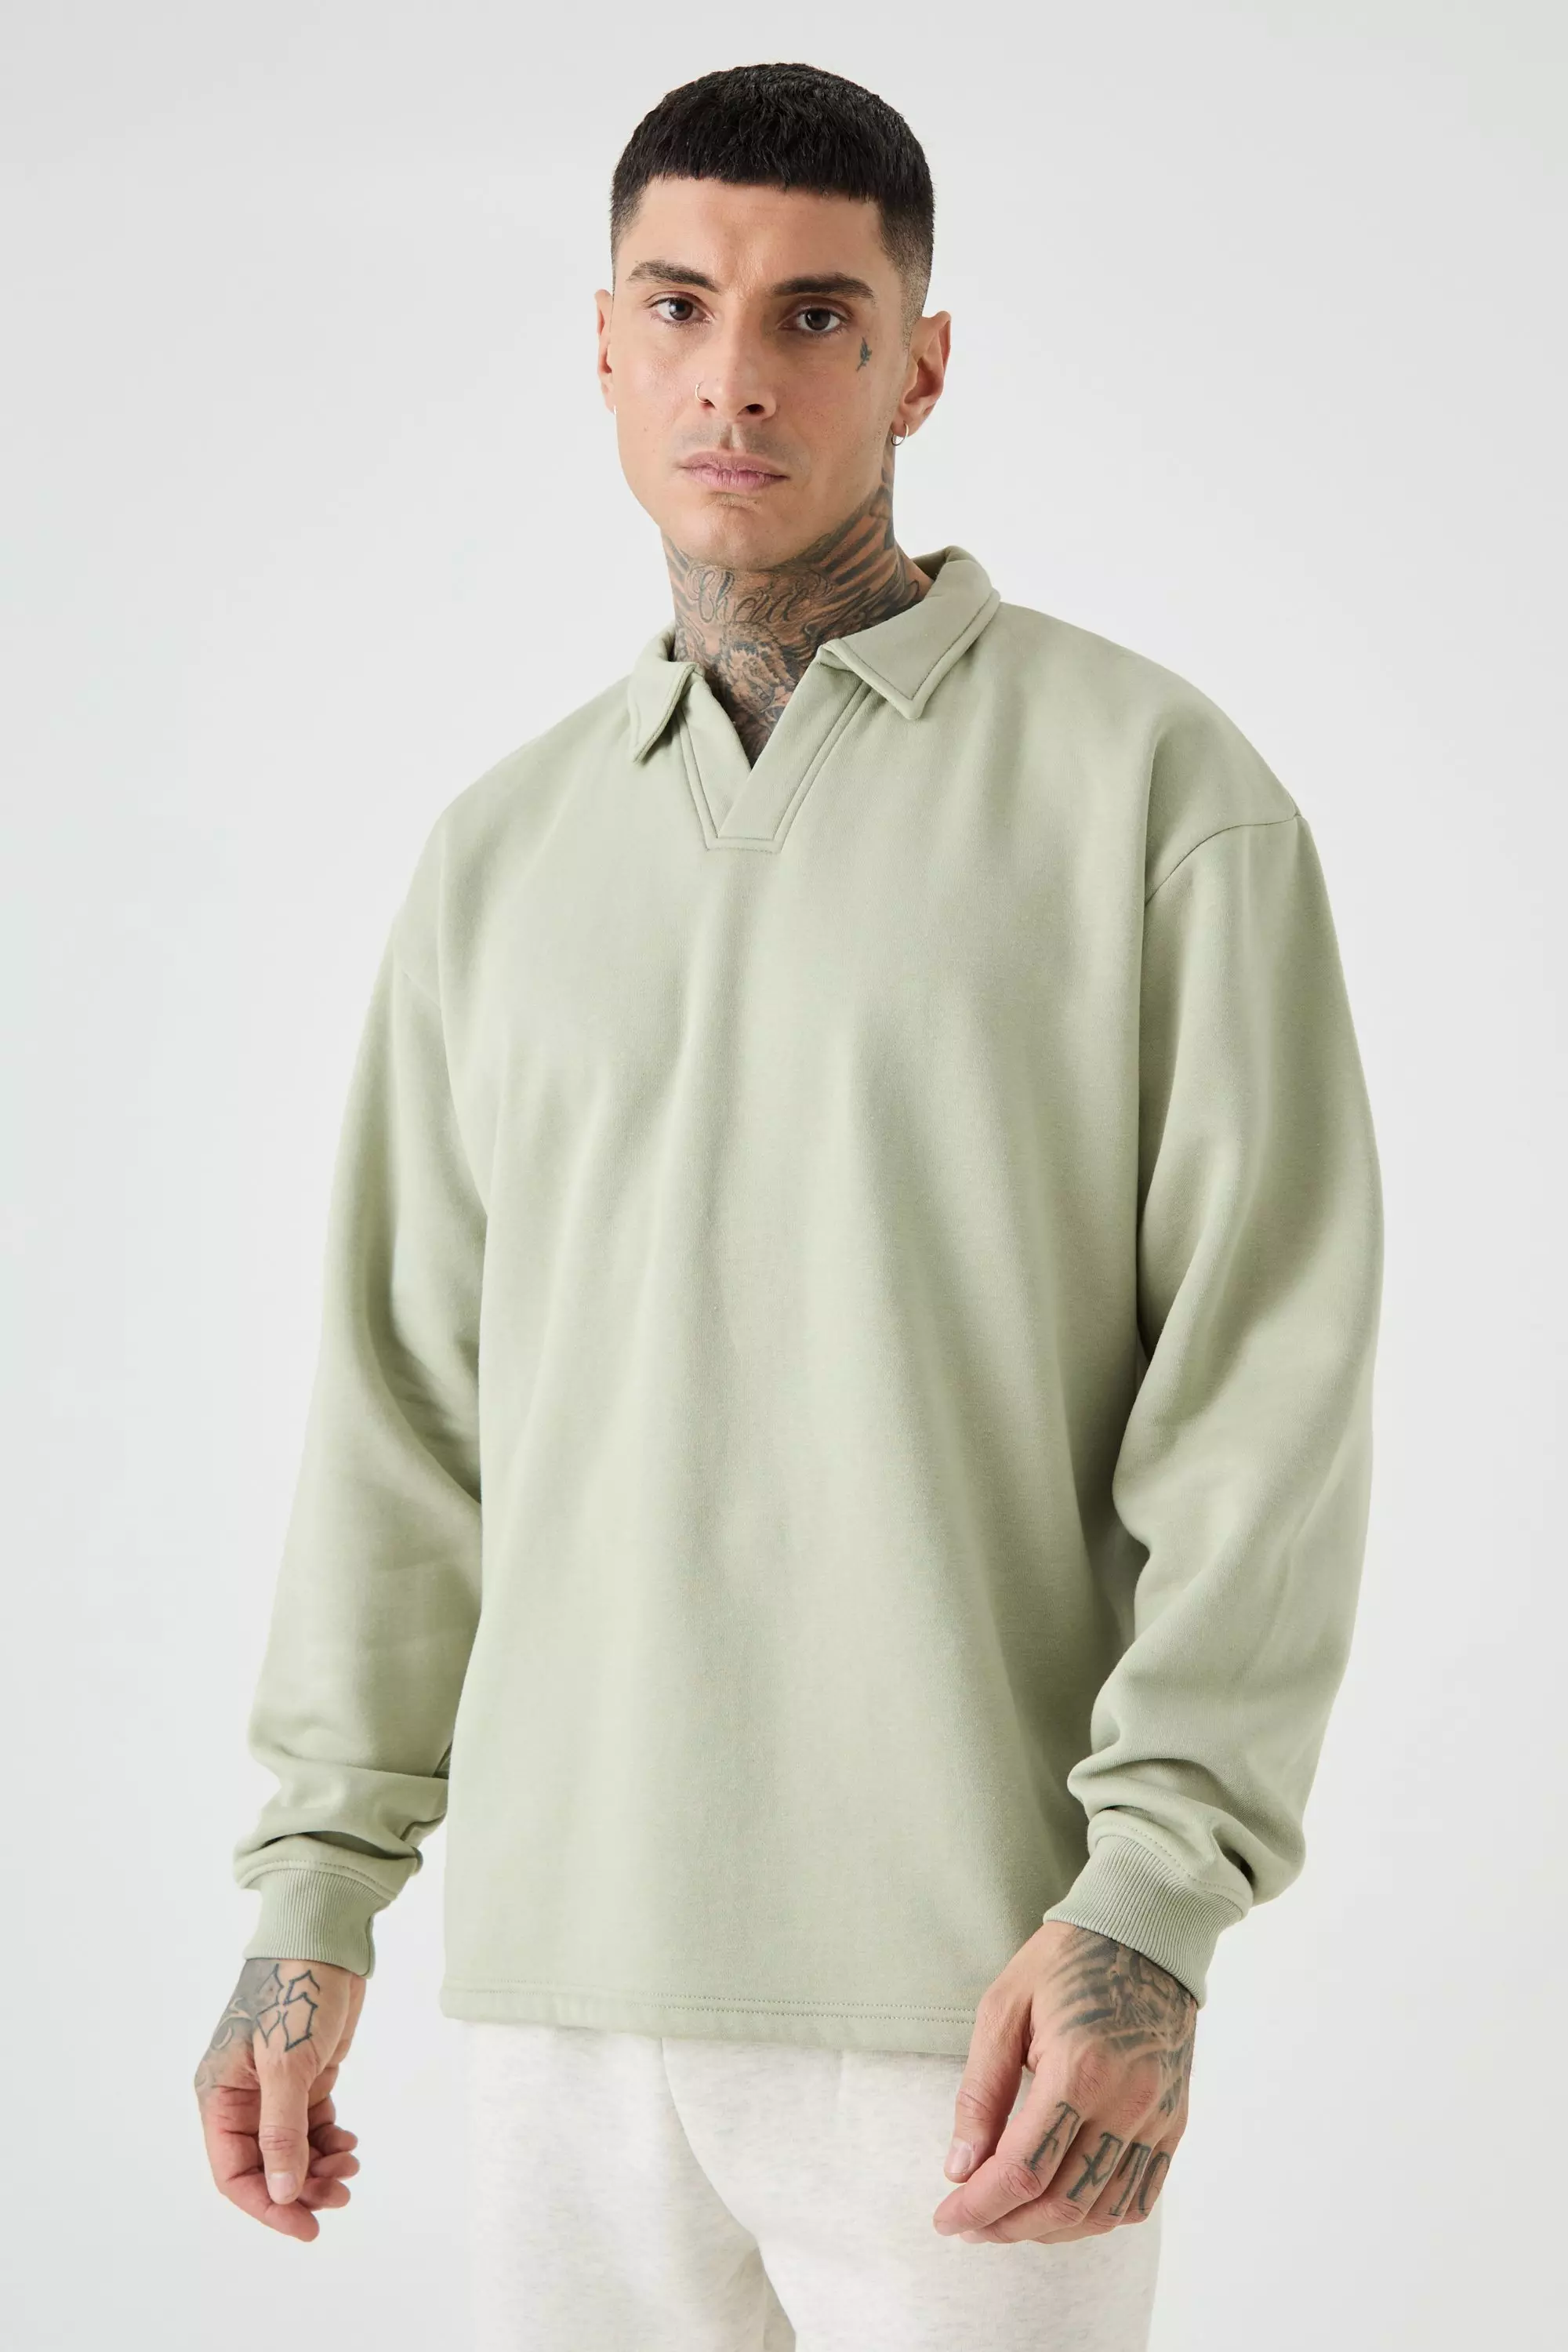 Sage Green Tall Oversized Revere Rugby Sweatshirt Polo